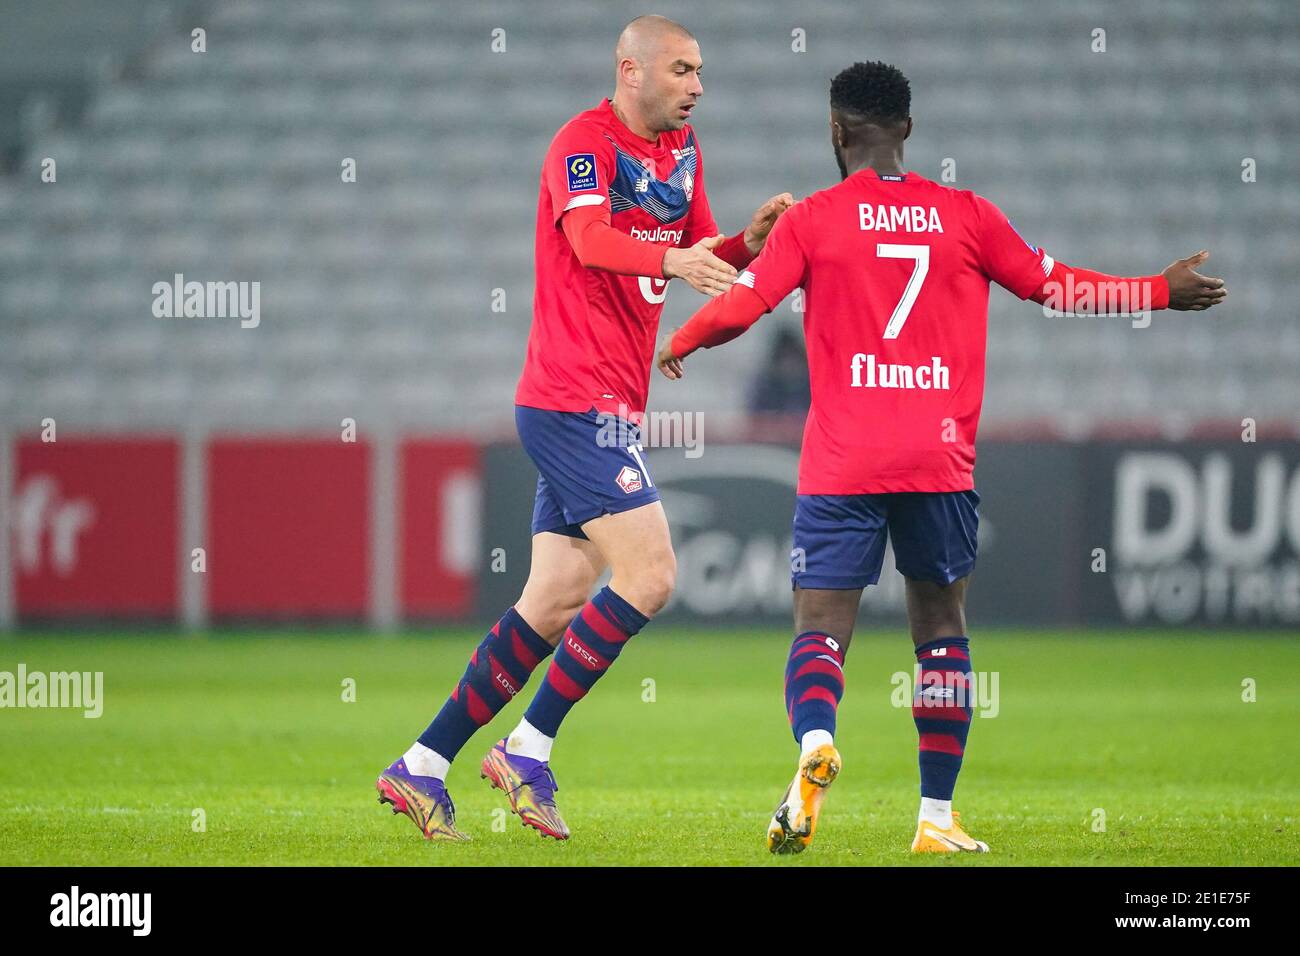 LILLE, FRANCE - JANUARY 6: Burak Yilmaz of Lille OSC celebrating his goal, Jonathan Bamba of Lille OSC during the Ligue 1 match between Lille OSC and Angers SCO at Stade Pierre Mauroy on January 6, 2021 in Lille, France (Photo by Jeroen Meuwsen/BSR Agency/Alamy Live News)*** Local Caption *** Burak Yilmaz, Jonathan Bamba Stock Photo